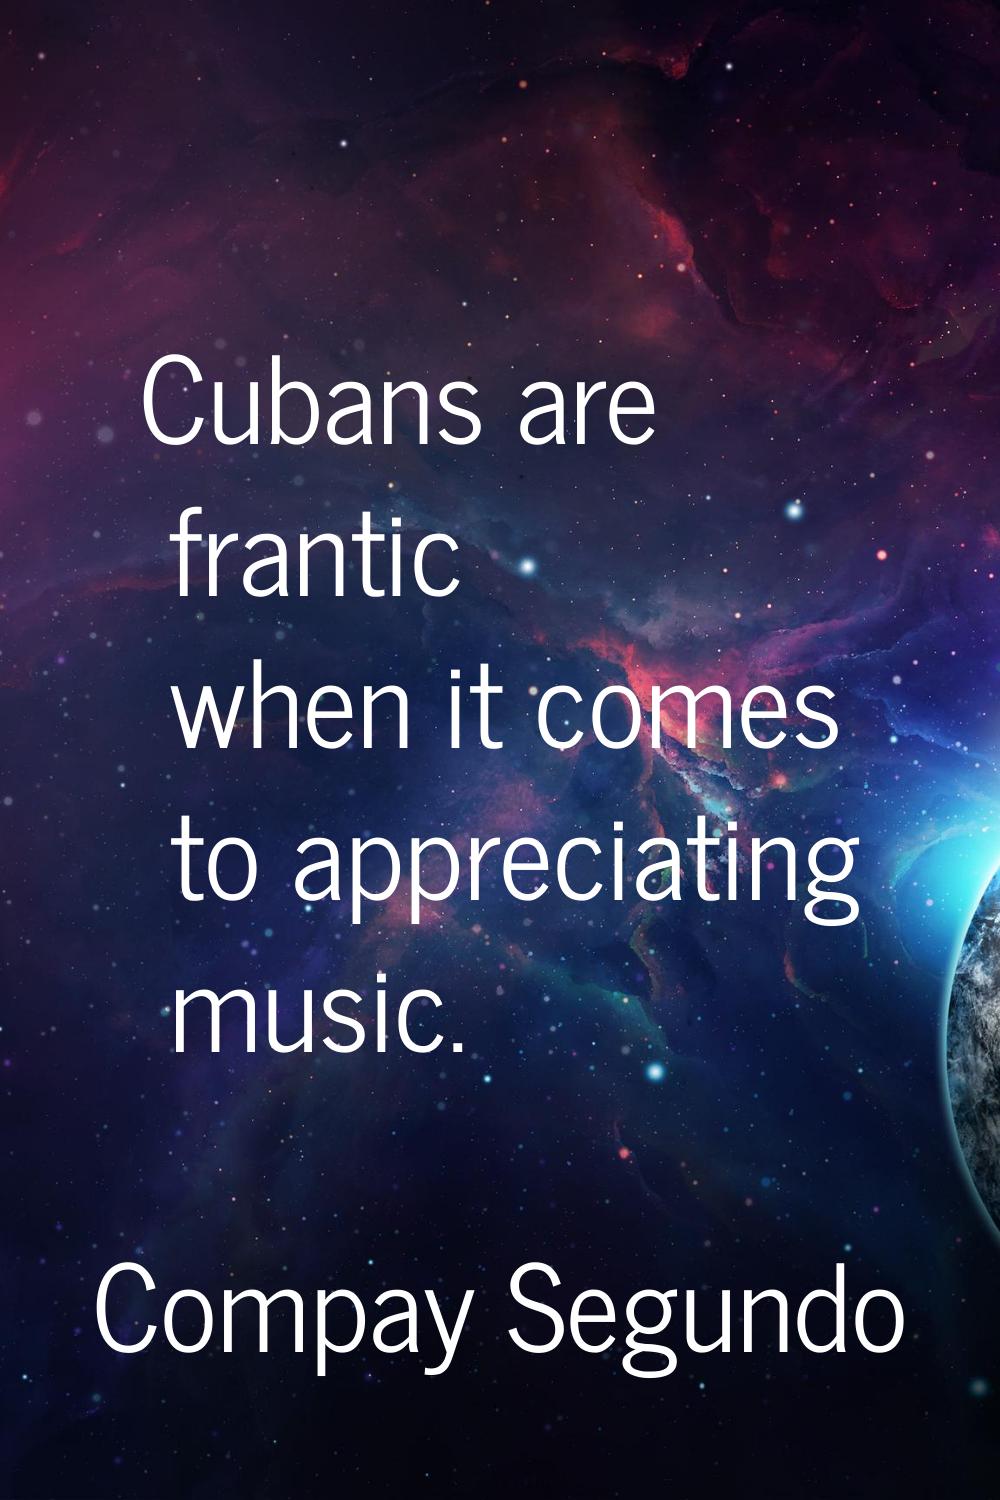 Cubans are frantic when it comes to appreciating music.